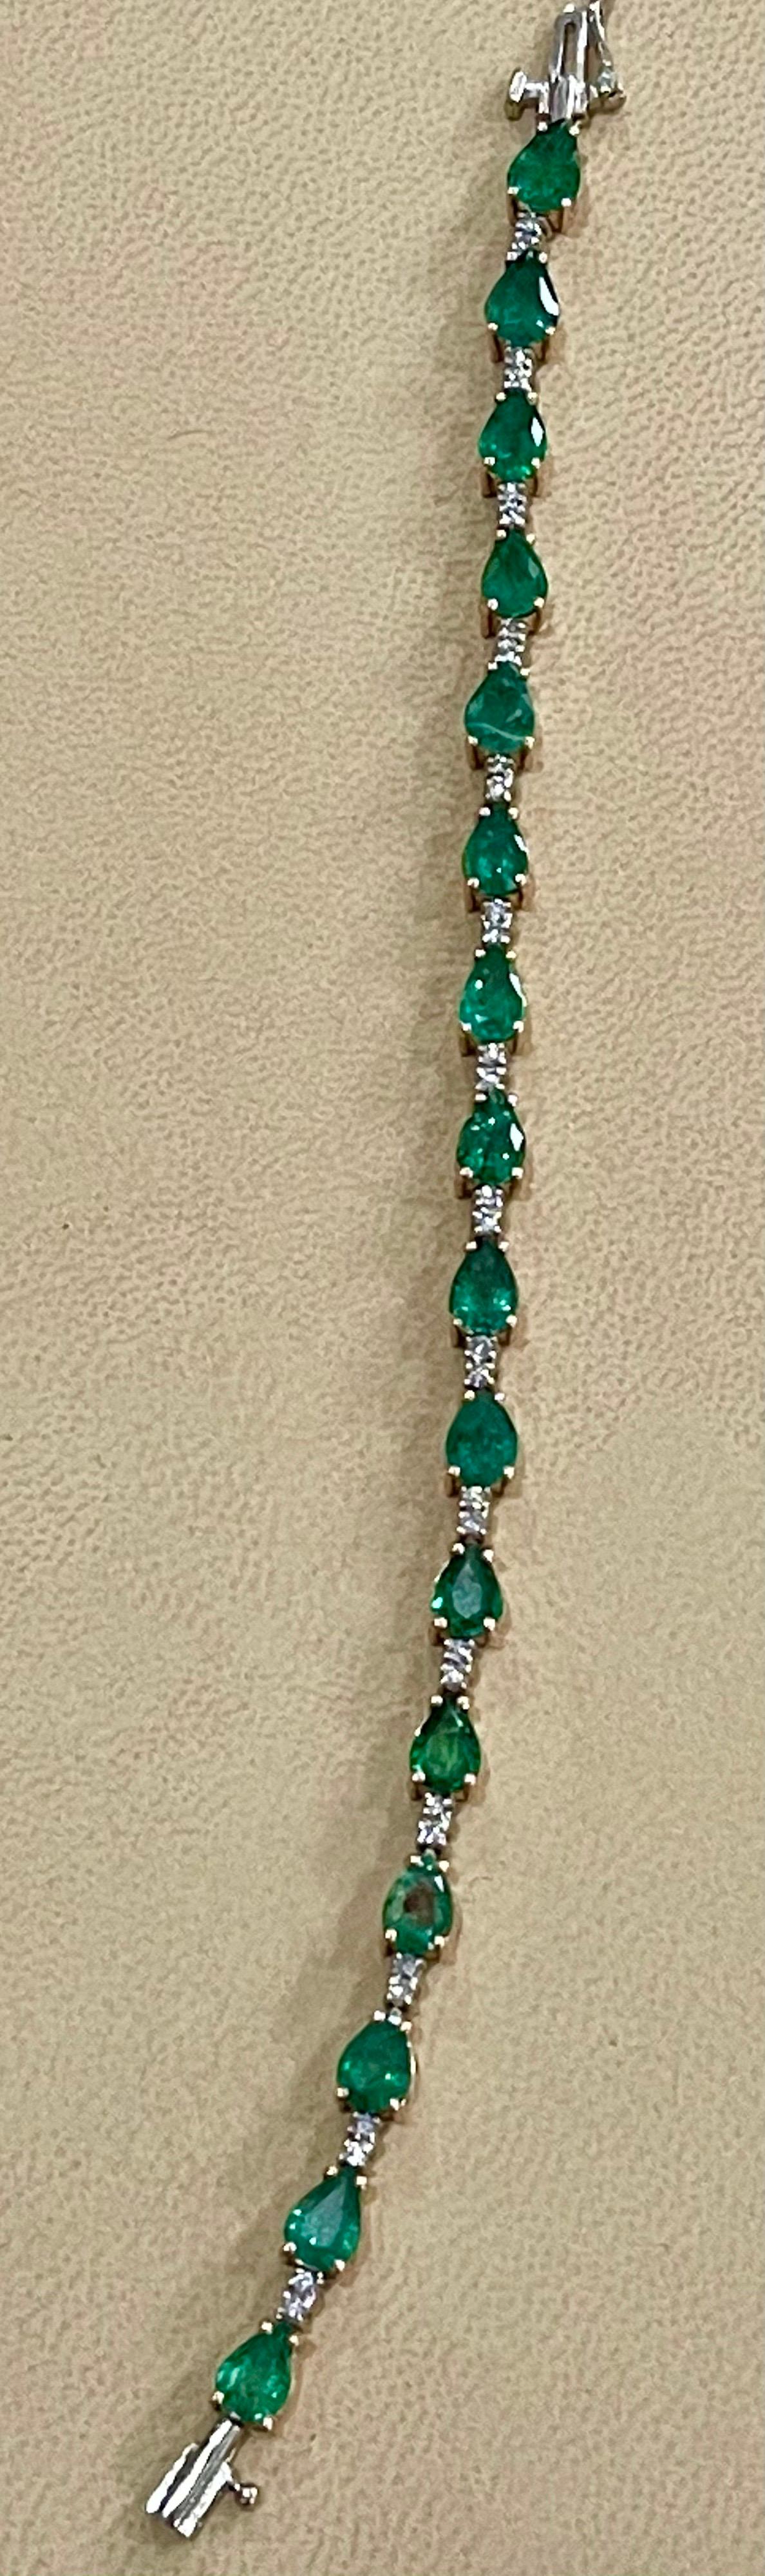  This exceptionally affordable Tennis  bracelet has  16 stones of Pear shape  Emeralds  . Each Emerald is spaced by two diamonds . Total weight of the Emeralds is  approximately 13 carat. Total number of diamonds are 32 and diamond weighs is over